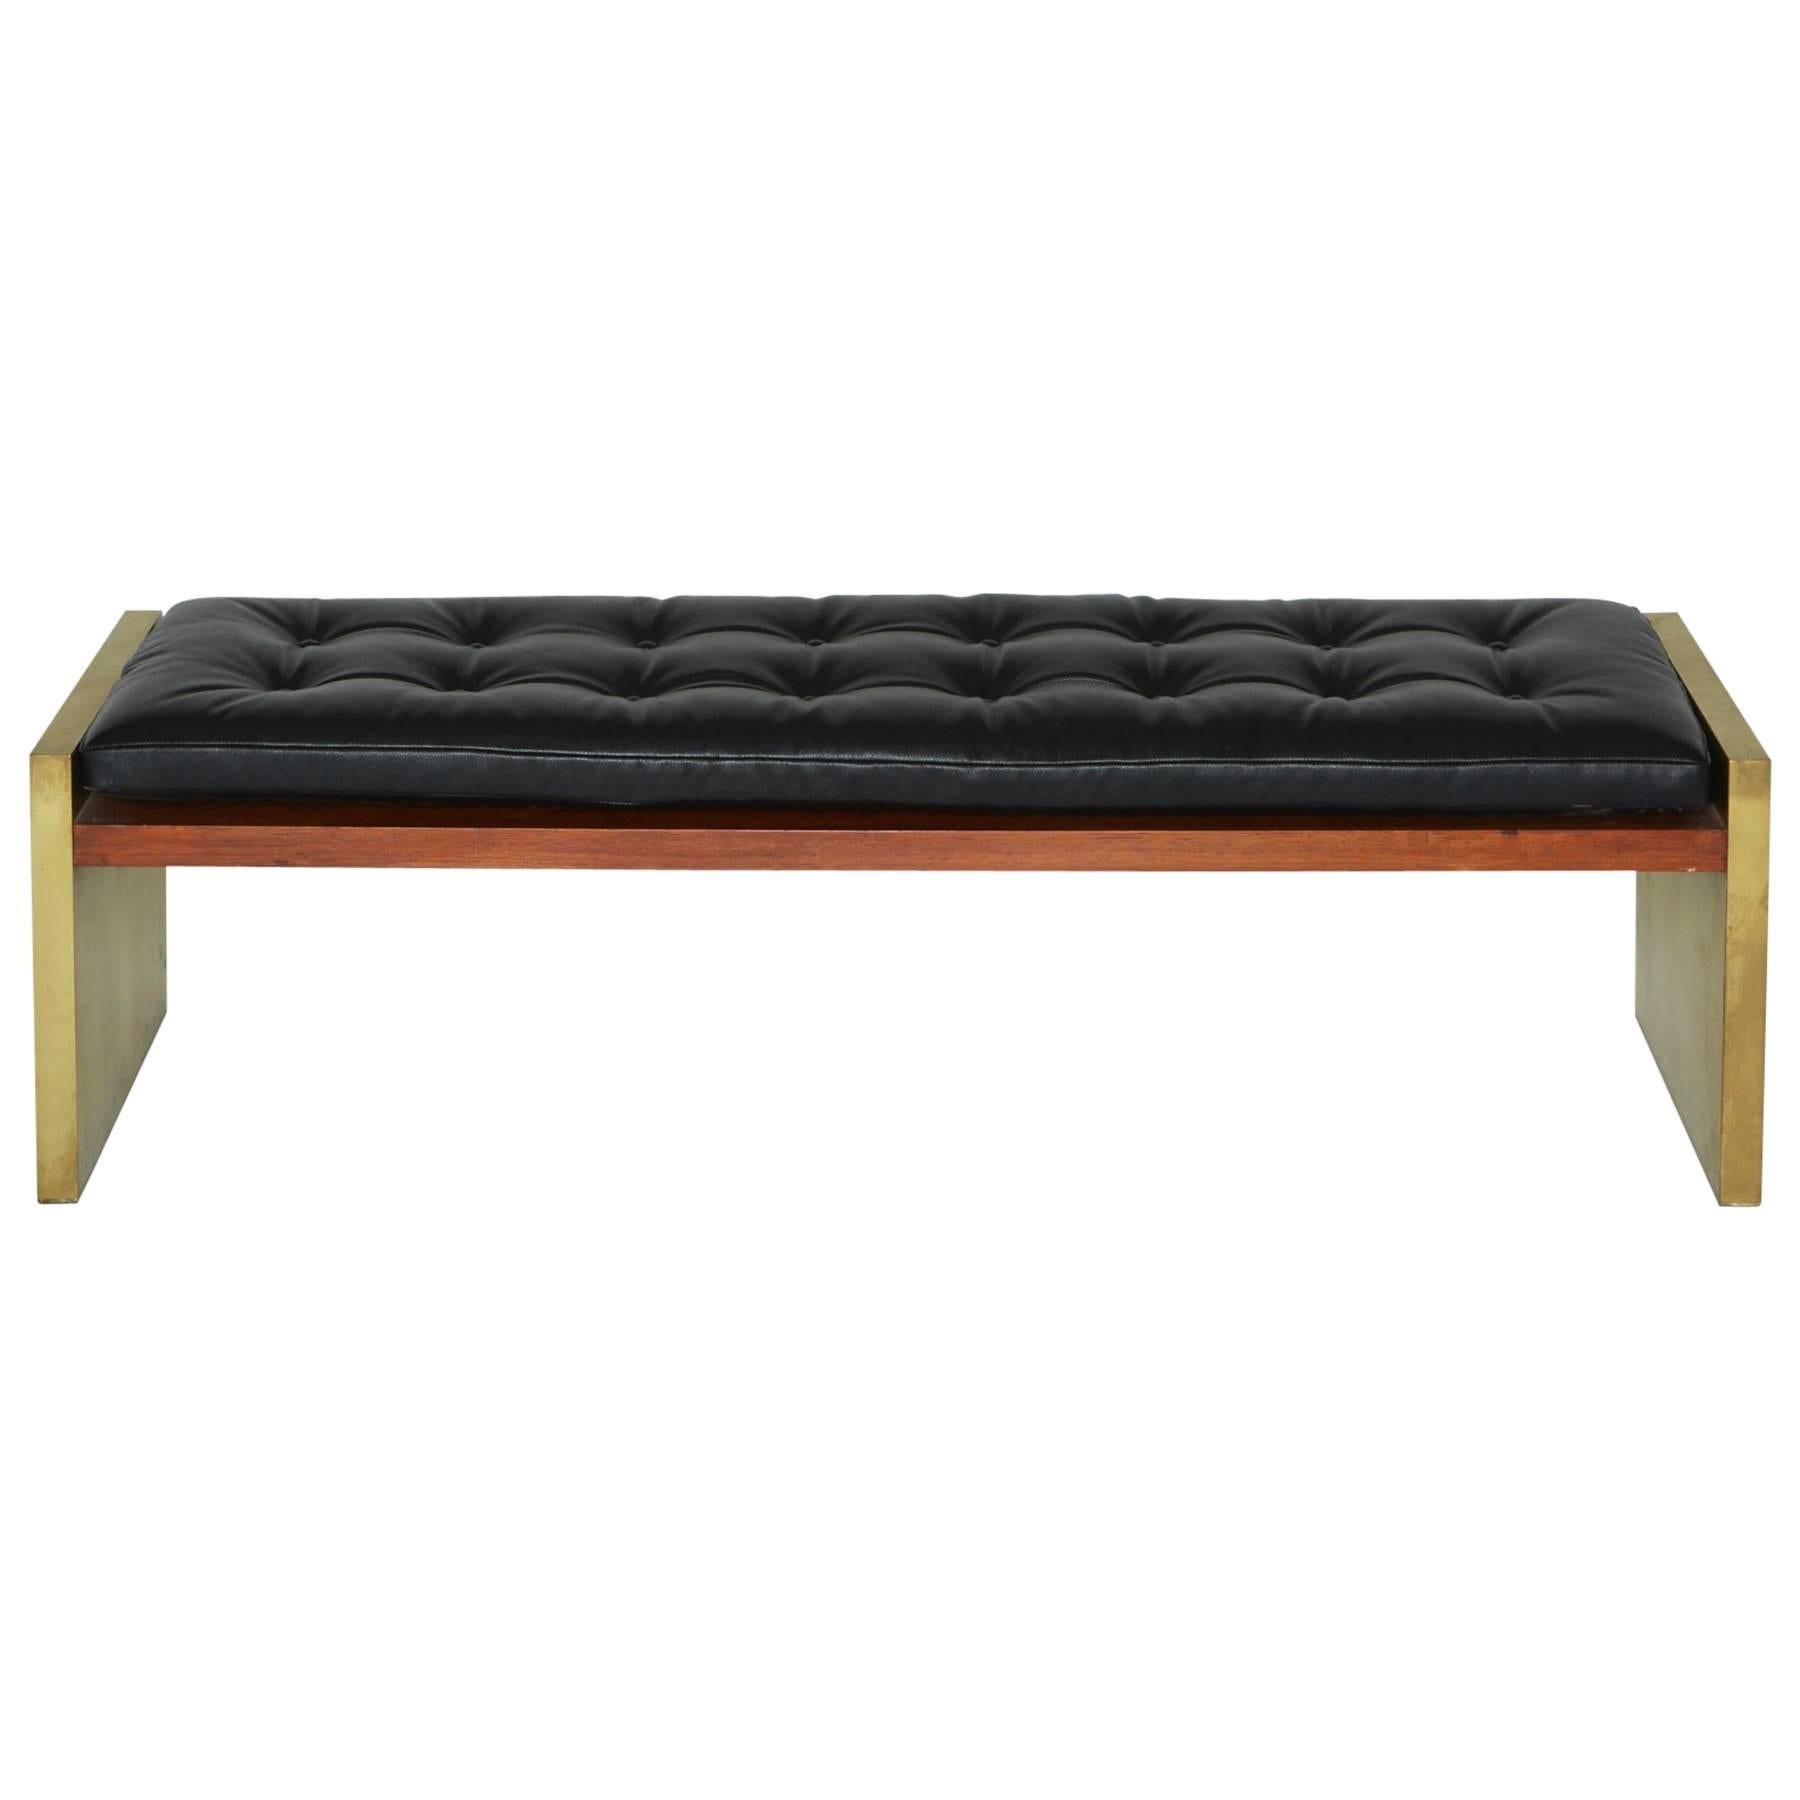 Rare Brass, Leather and Rosewood Bench by Roger Sprunger for Dunbar